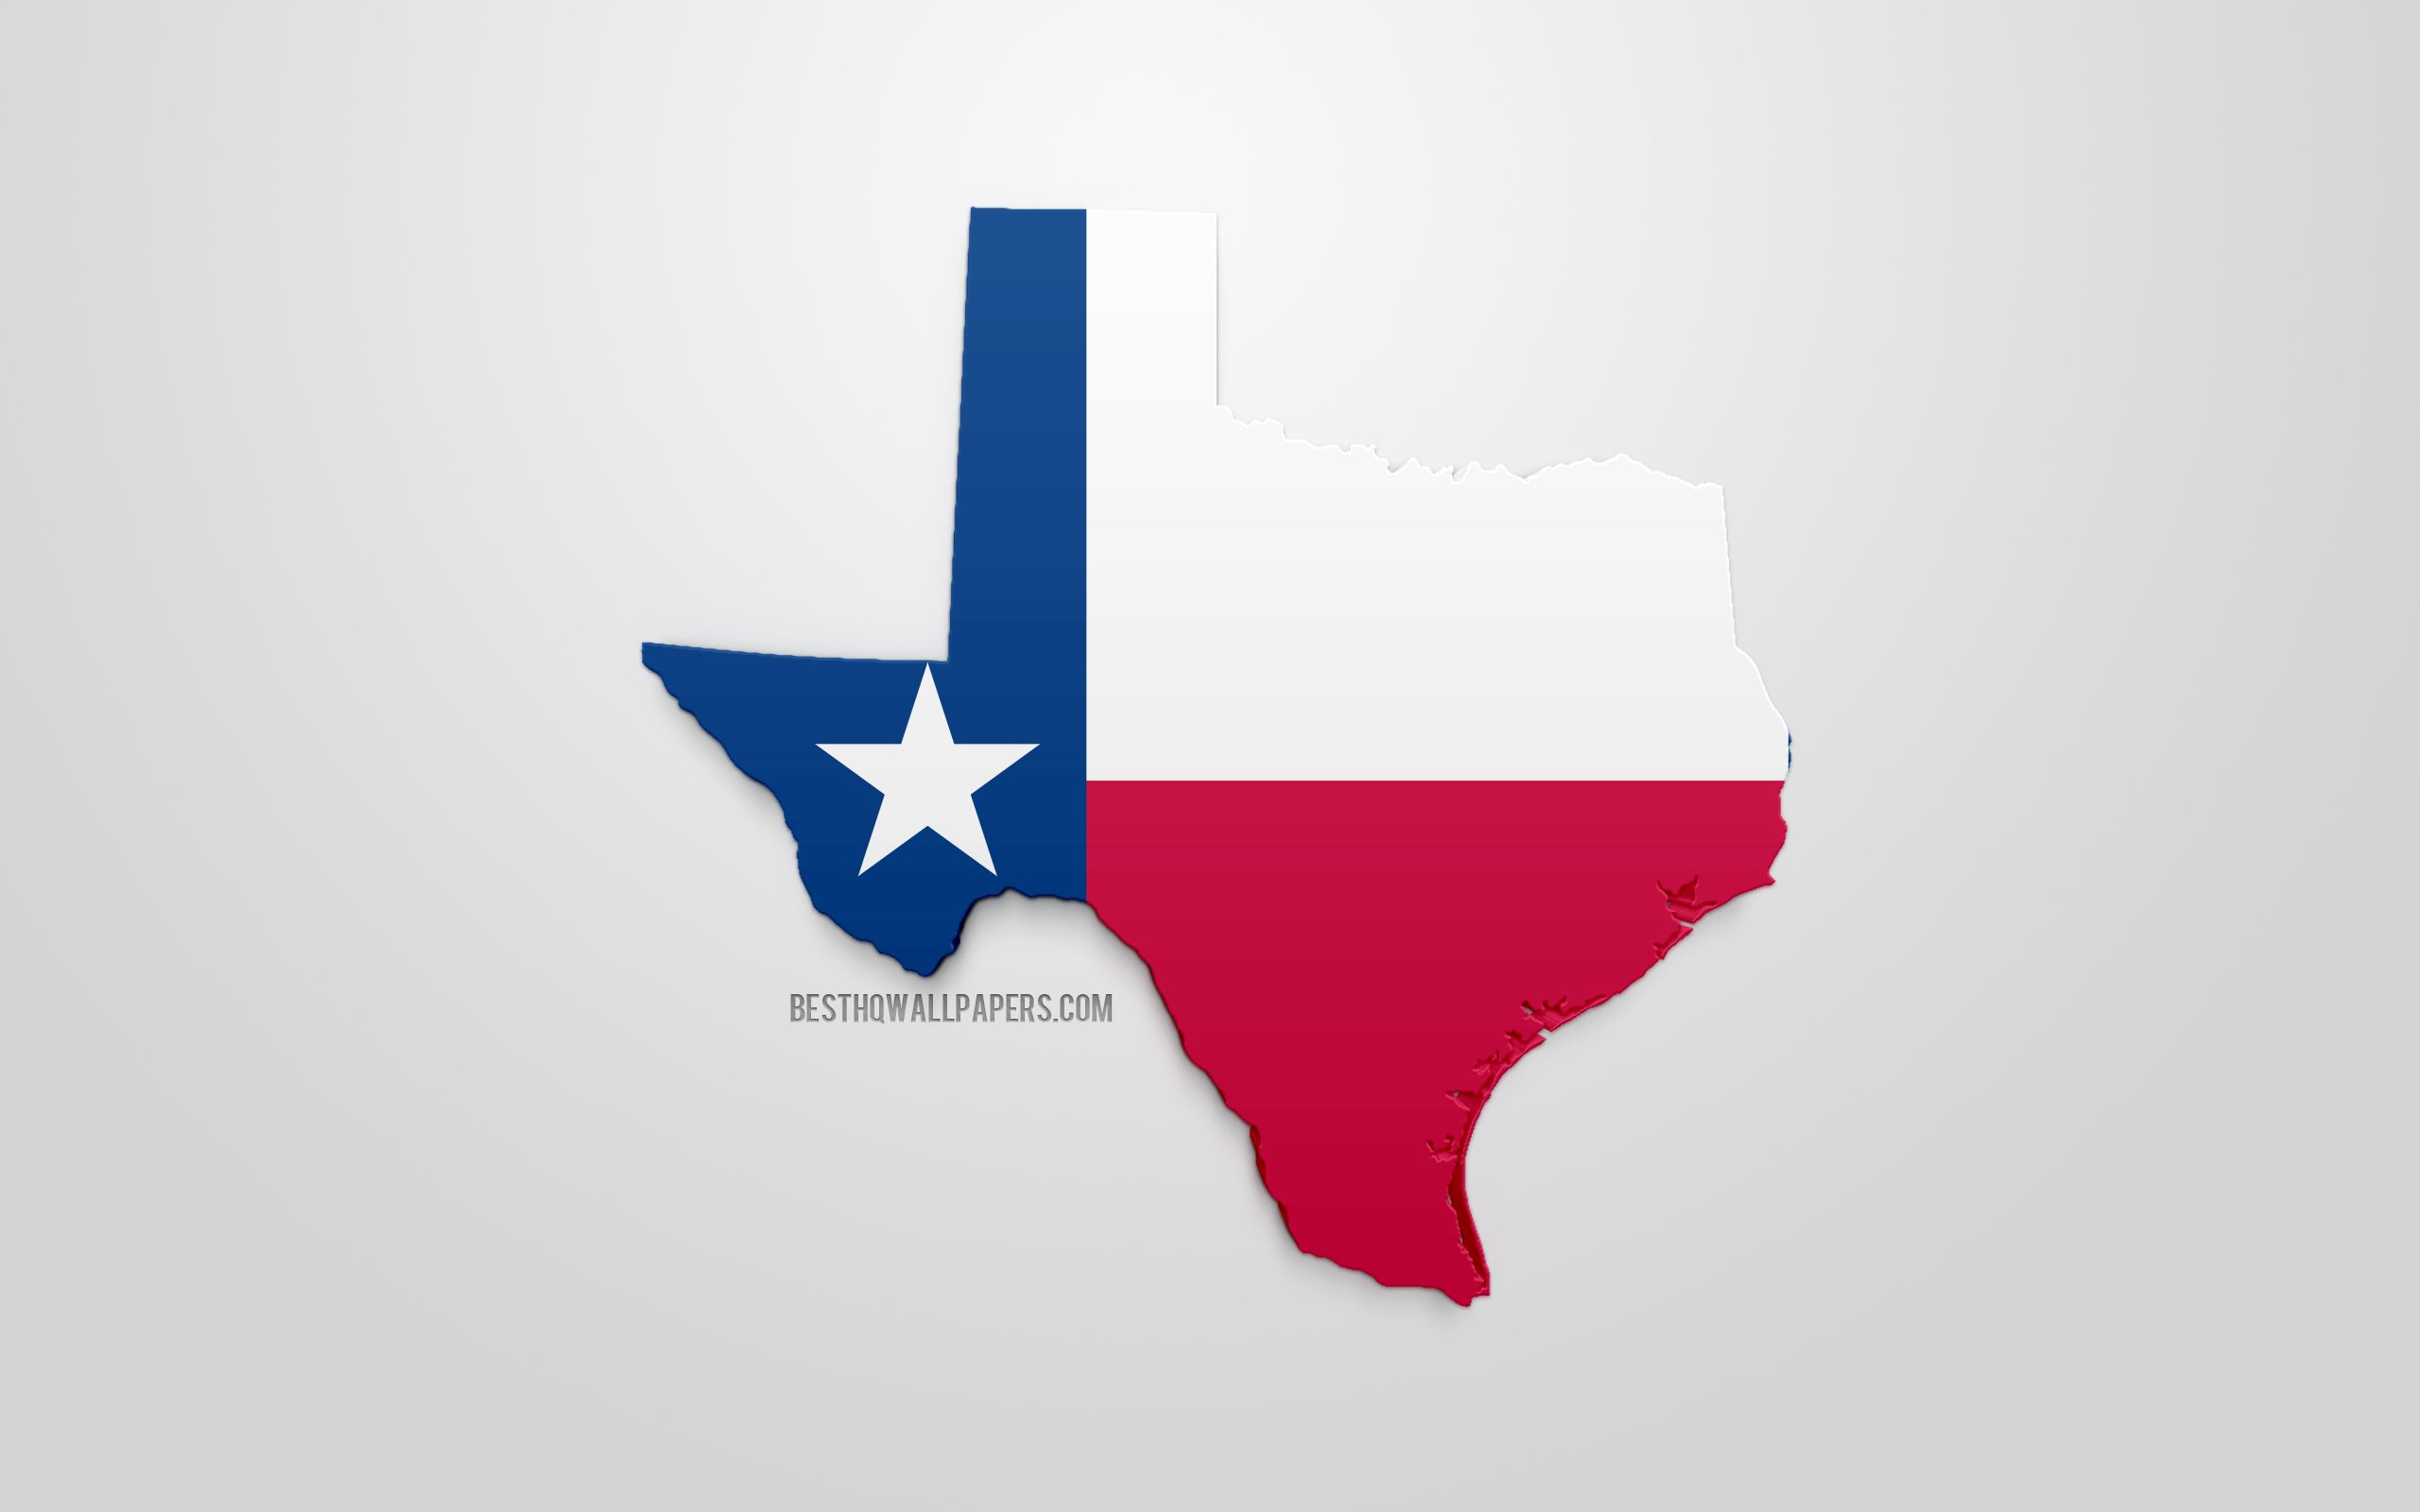 Download wallpaper 3D flag of Texas, map silhouette of Texas, US state, 3D art, Texas 3D flag, USA, North America, Texas, geography, Texas 3D silhouette for desktop with resolution 2560x1600. High Quality